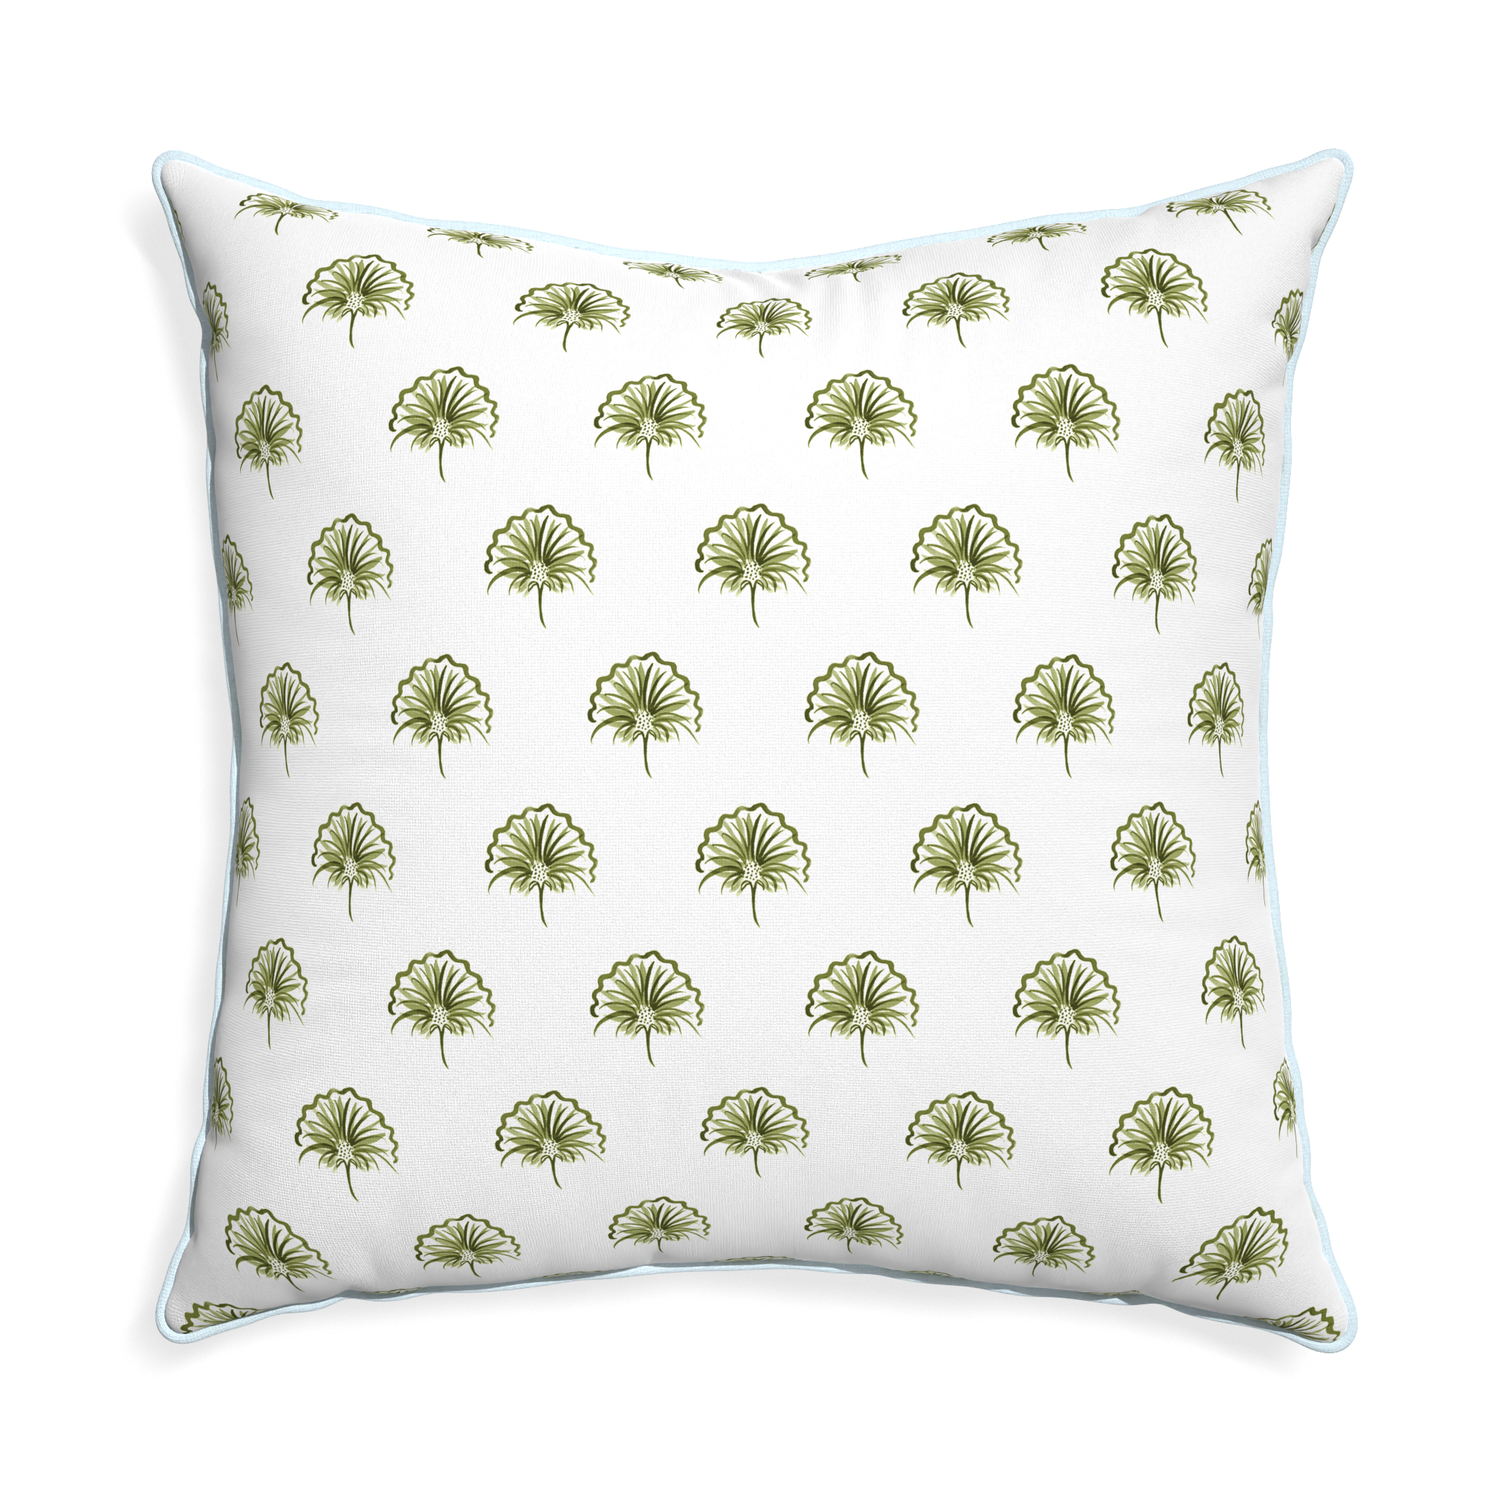 Euro-sham penelope moss custom pillow with powder piping on white background